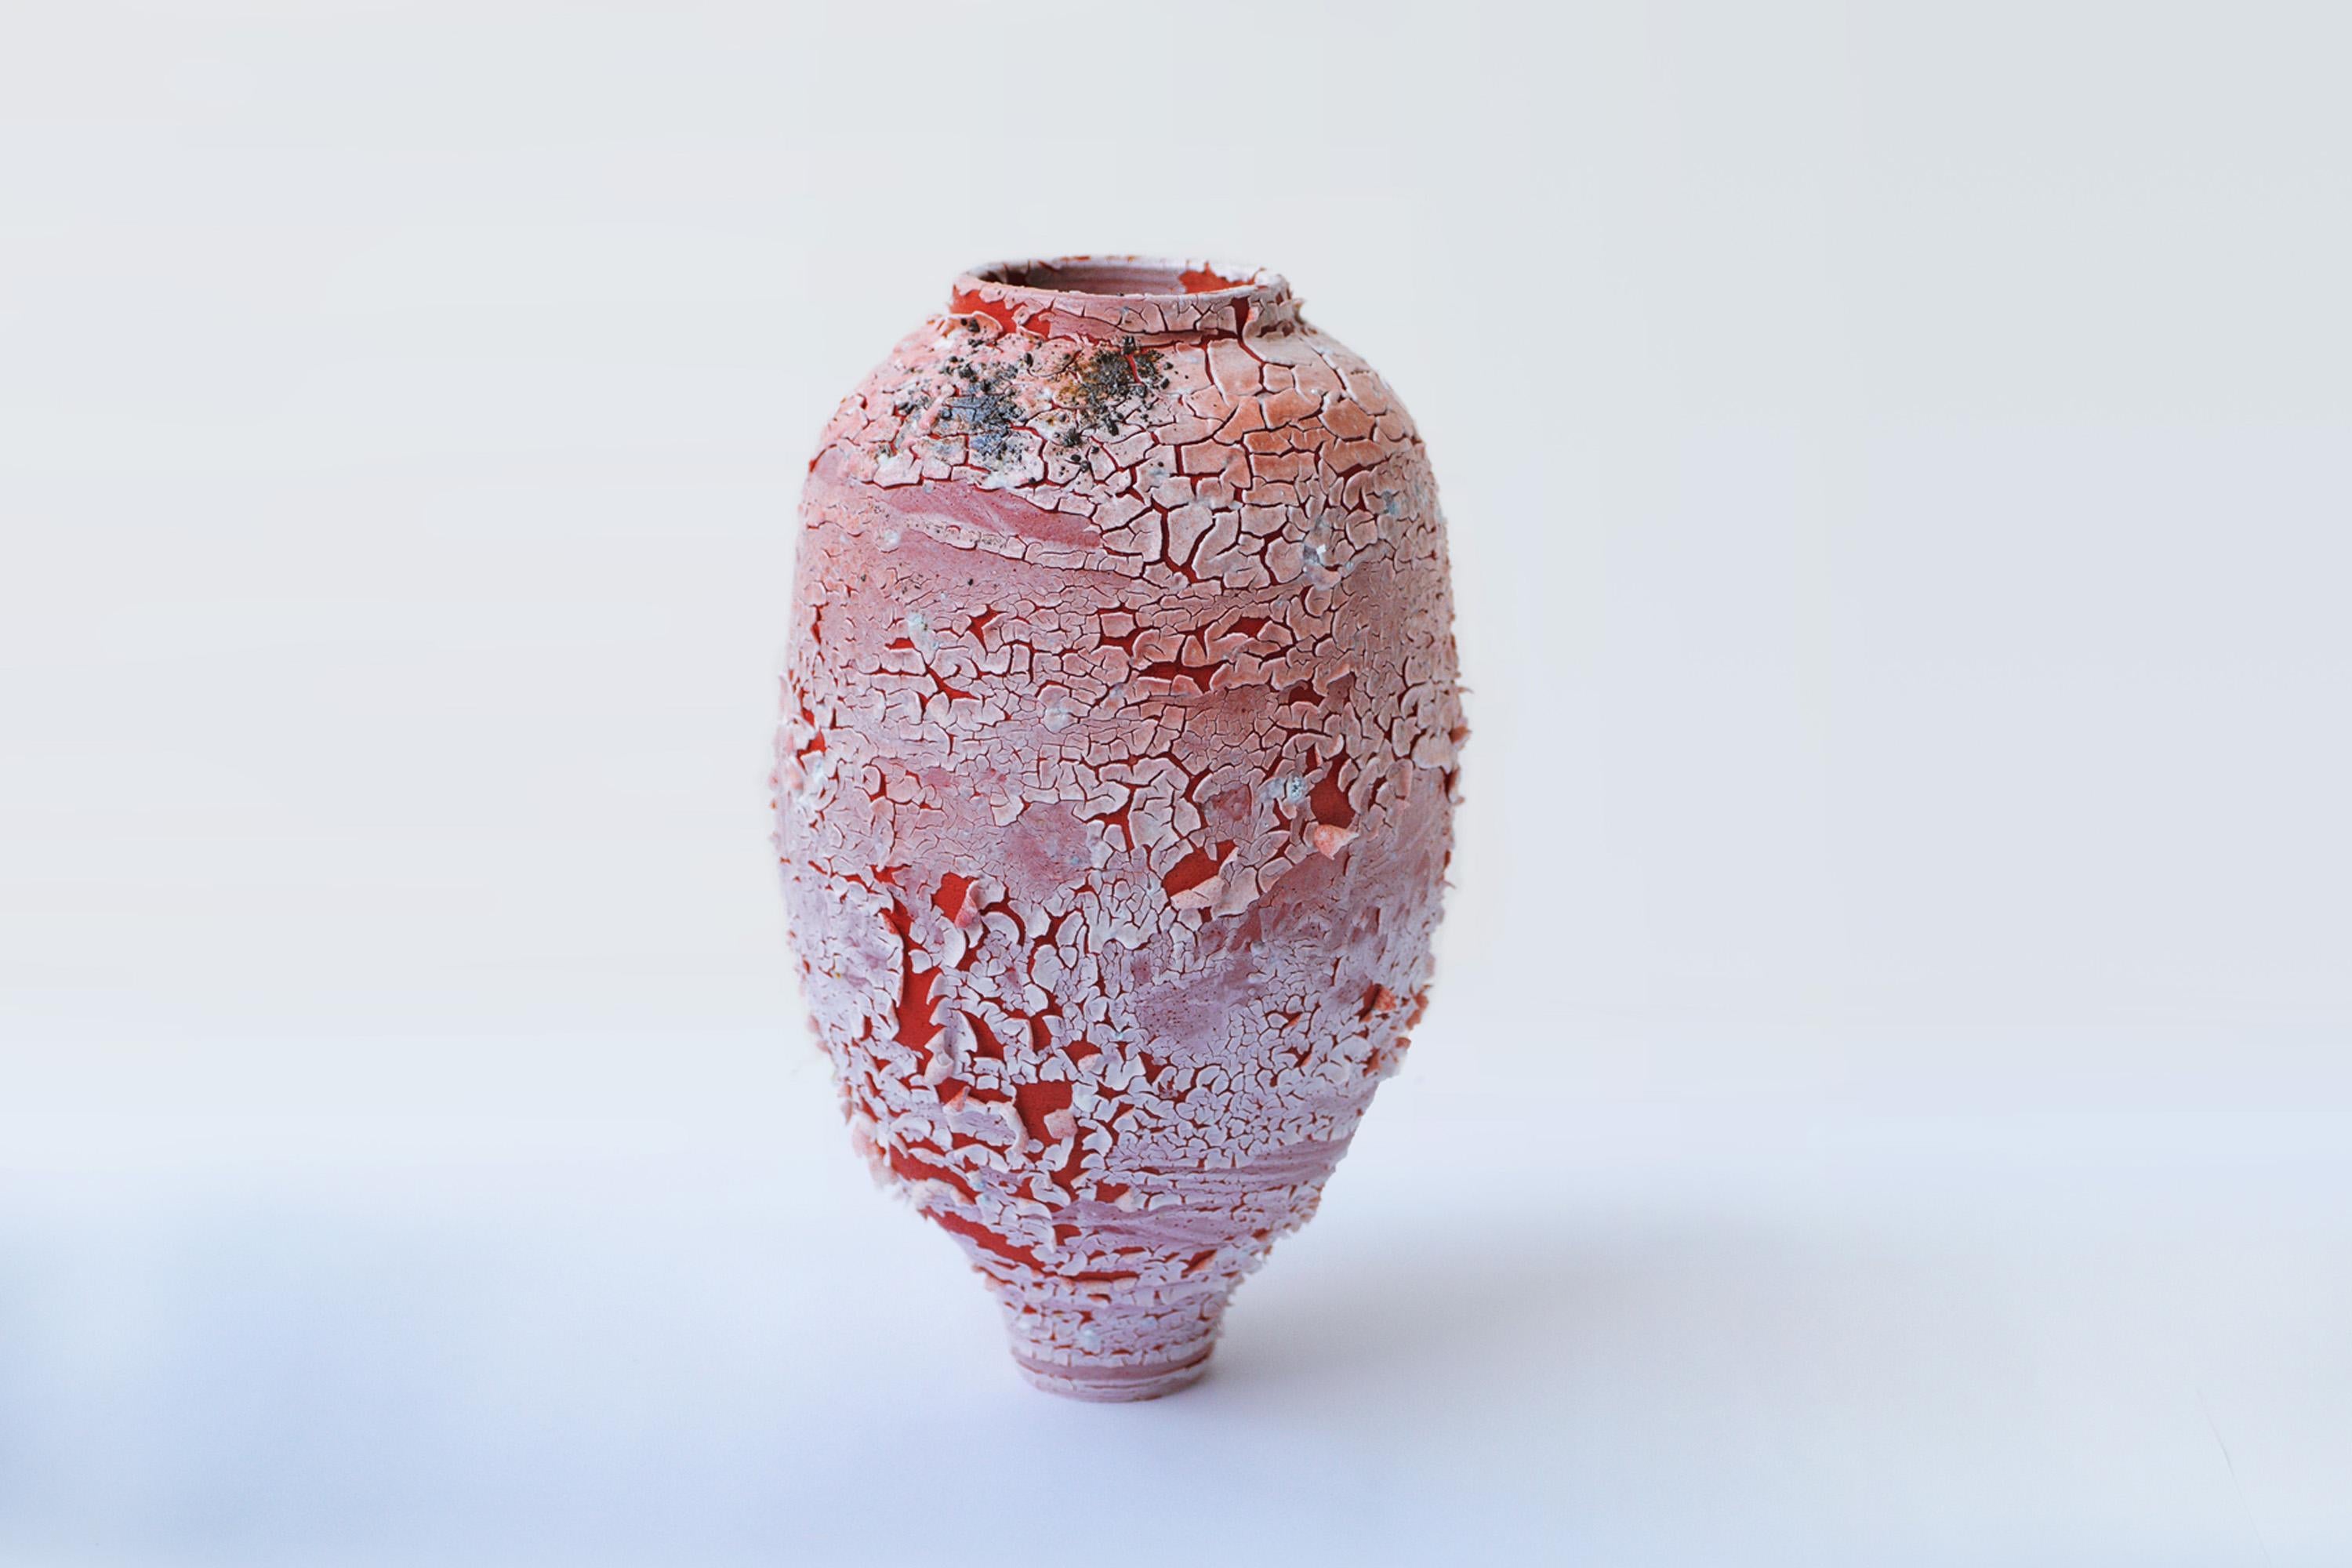 Stoneware red pithos by Arina Antonova
2020
Dimensions: H 50 x D 30 cm
Materials: stoneware, wild clay, glaze

Born in Sewastopol (Crimea), I was surrounded by the natural variety of the coastal Black Sea views with rocky beaches and